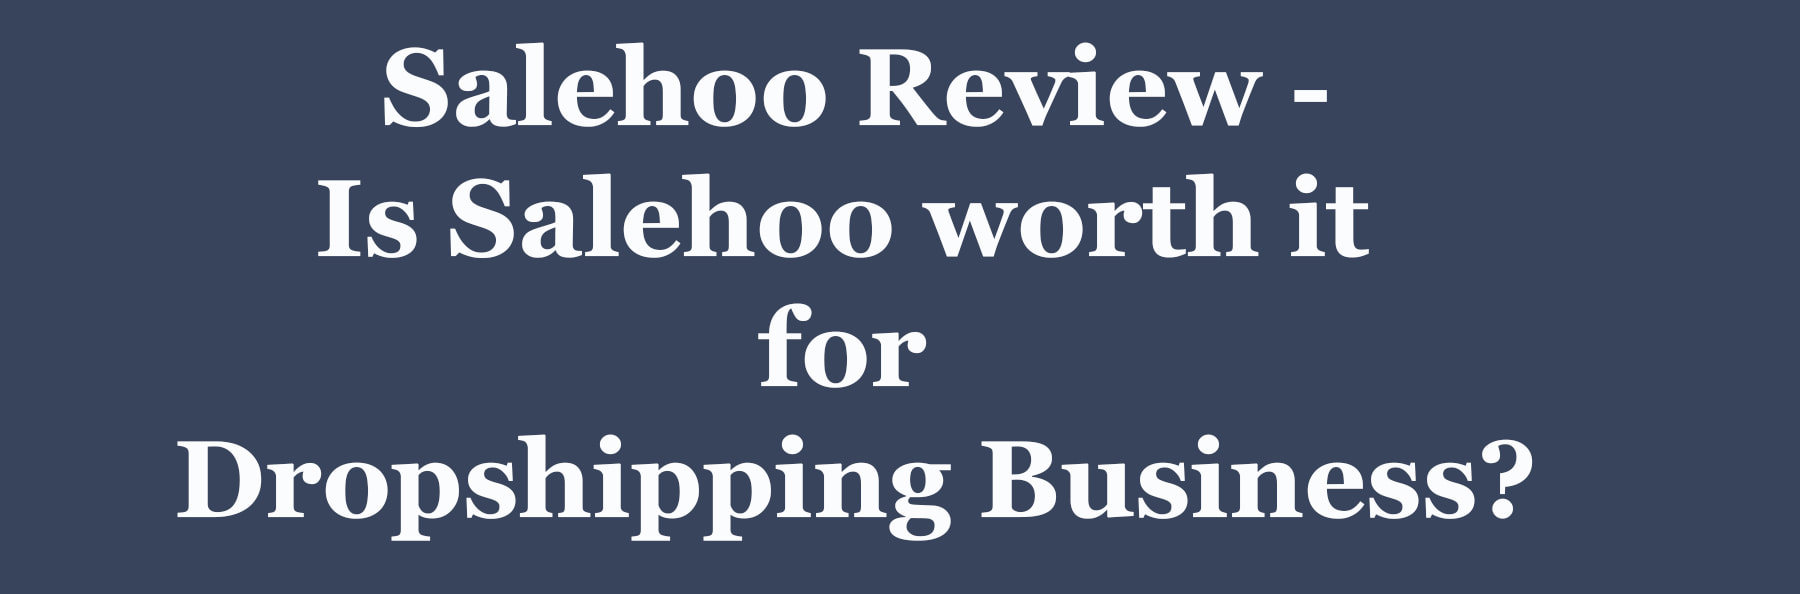 Salehoo-Review-Is-Salehoo-worth-it-for-Dropshipping-Business